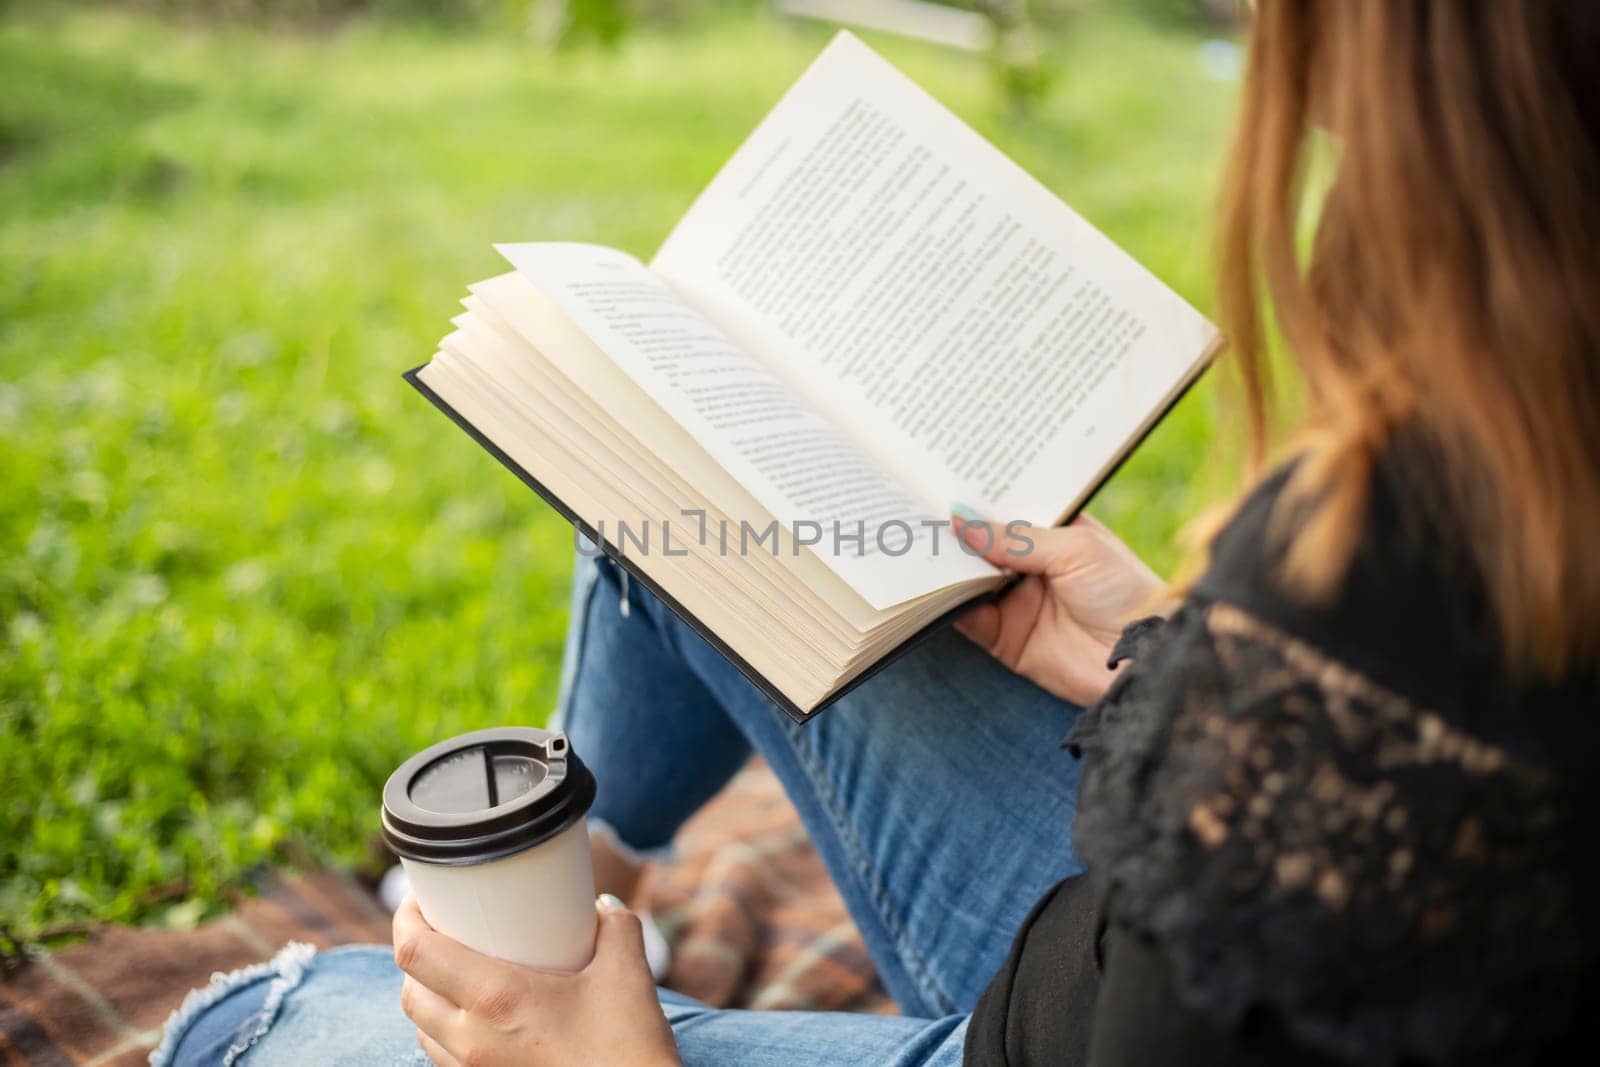 A woman sits near a tree in the park and holds a book and a cup with a hot drink in her hands. A woman in jeans and a t-shirt reading a book outdoor.